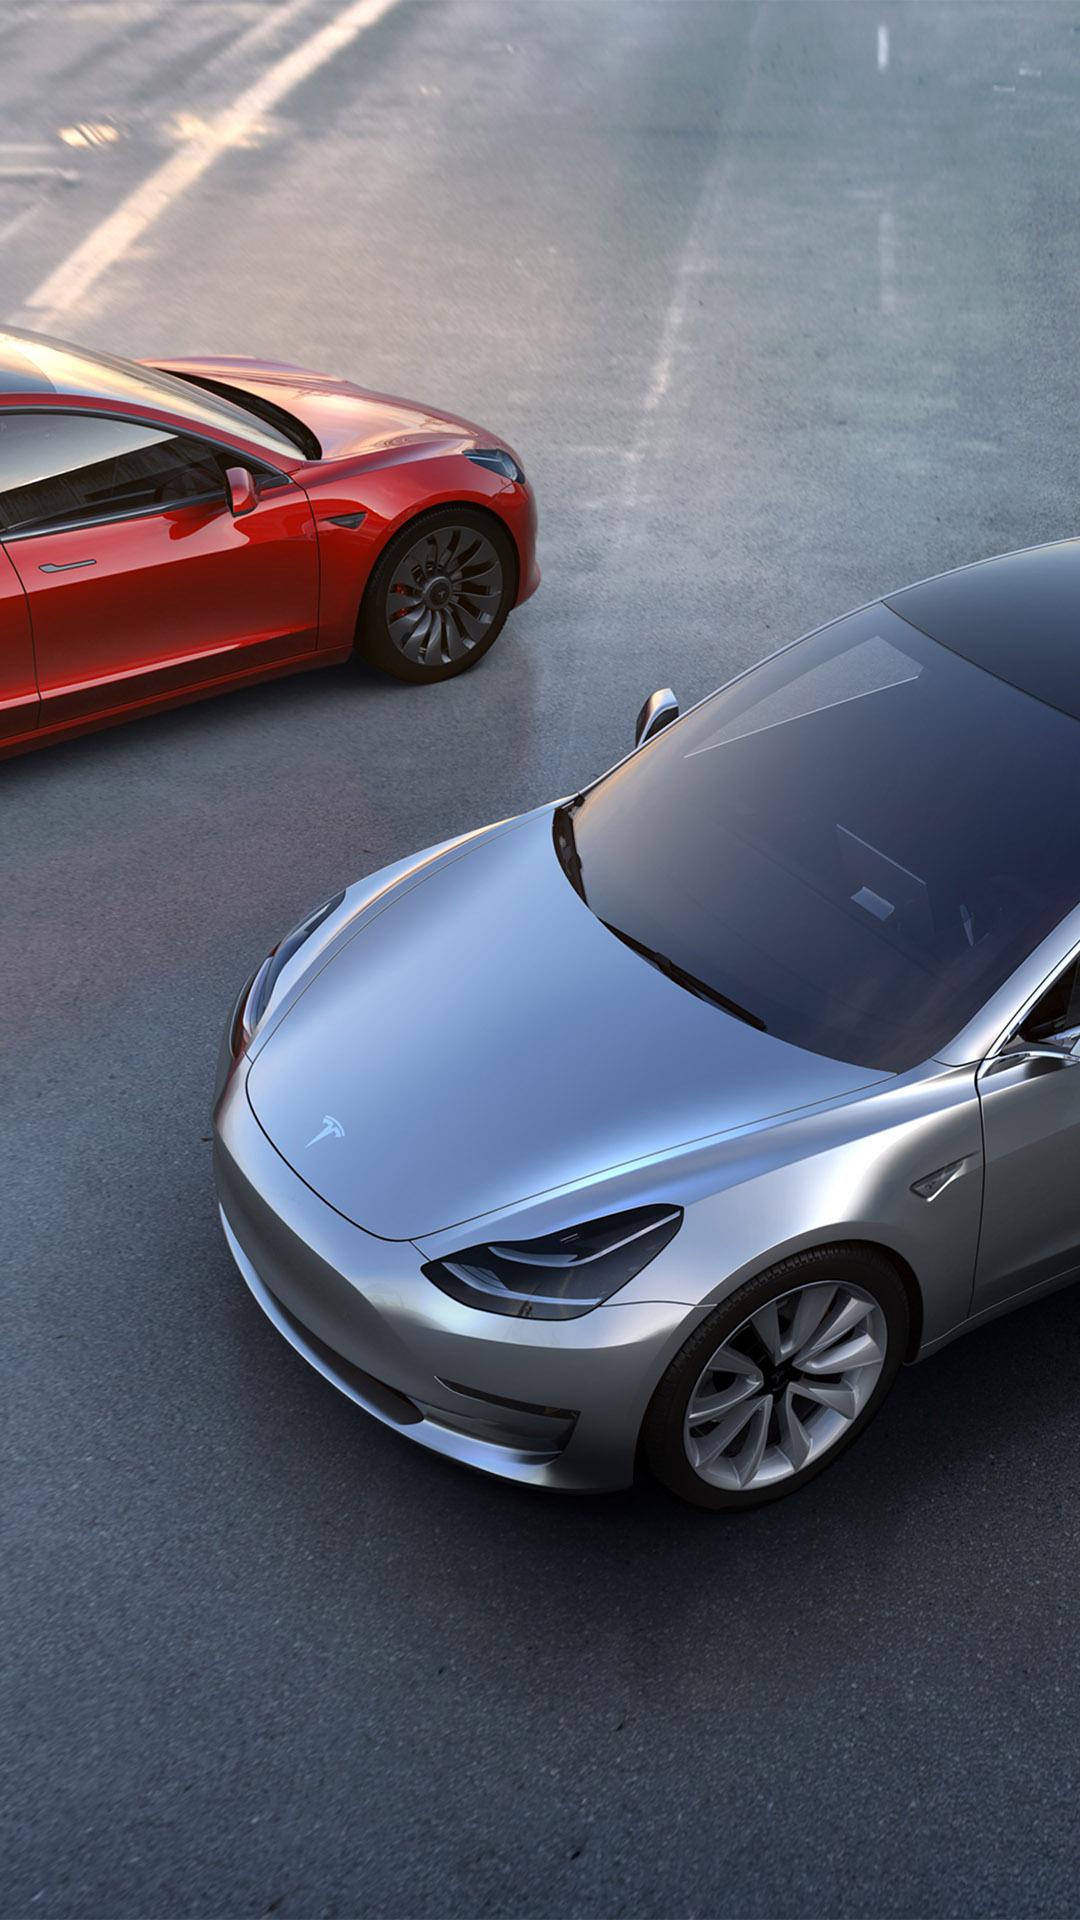 tesla model 3 electric car red wallpapers wallpaper cave on tesla model 3 electric car red wallpapers